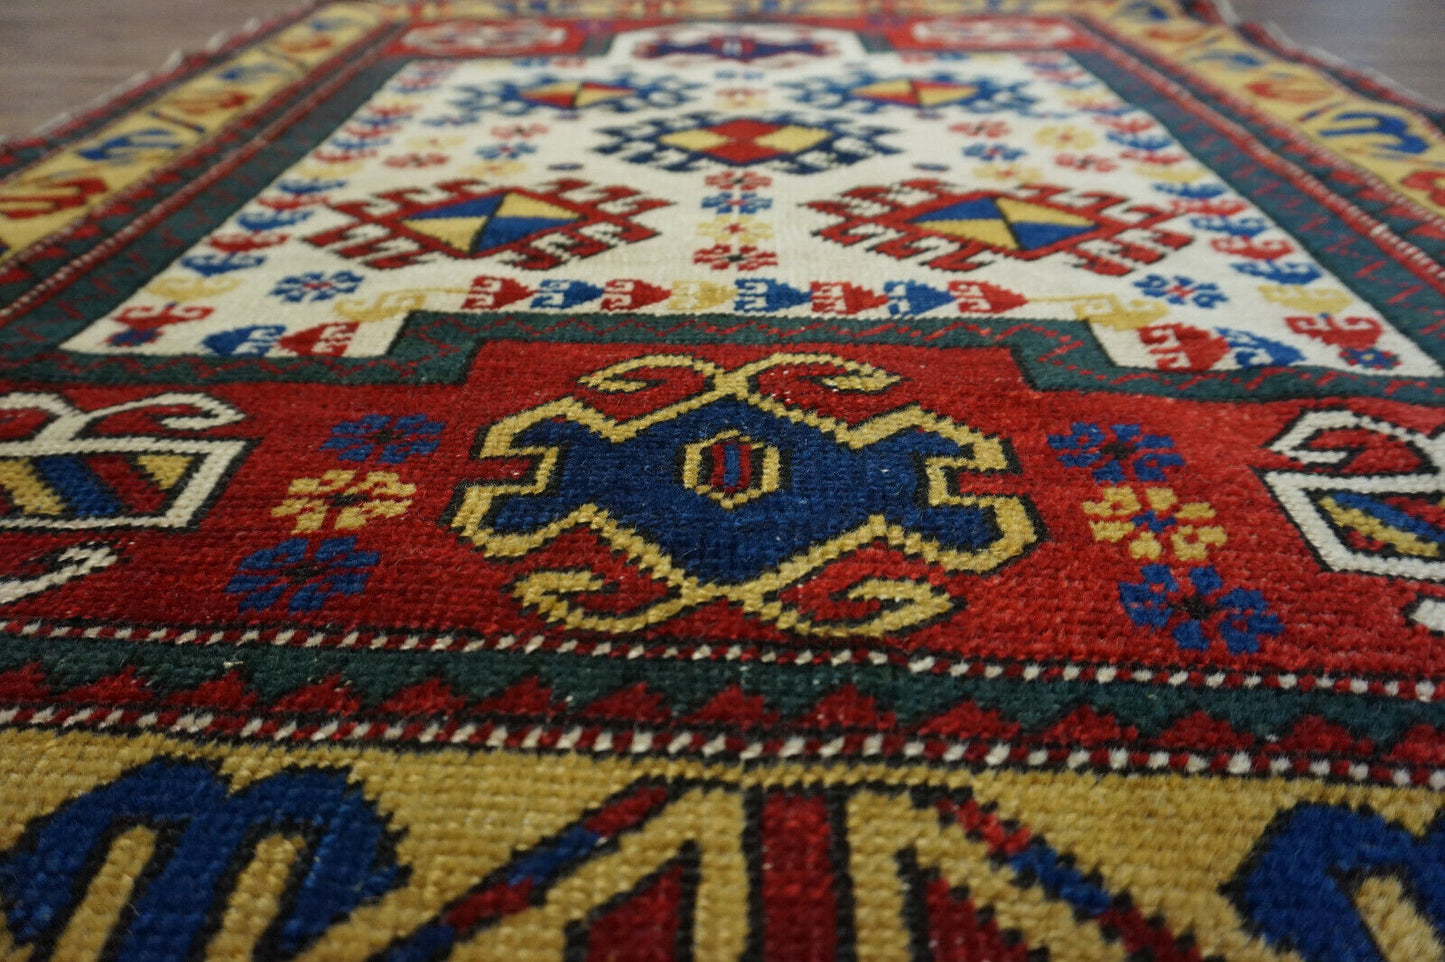 Overhead shot of the Handmade Antique Caucasian Kazak Prayer Rug displaying size and dimensions